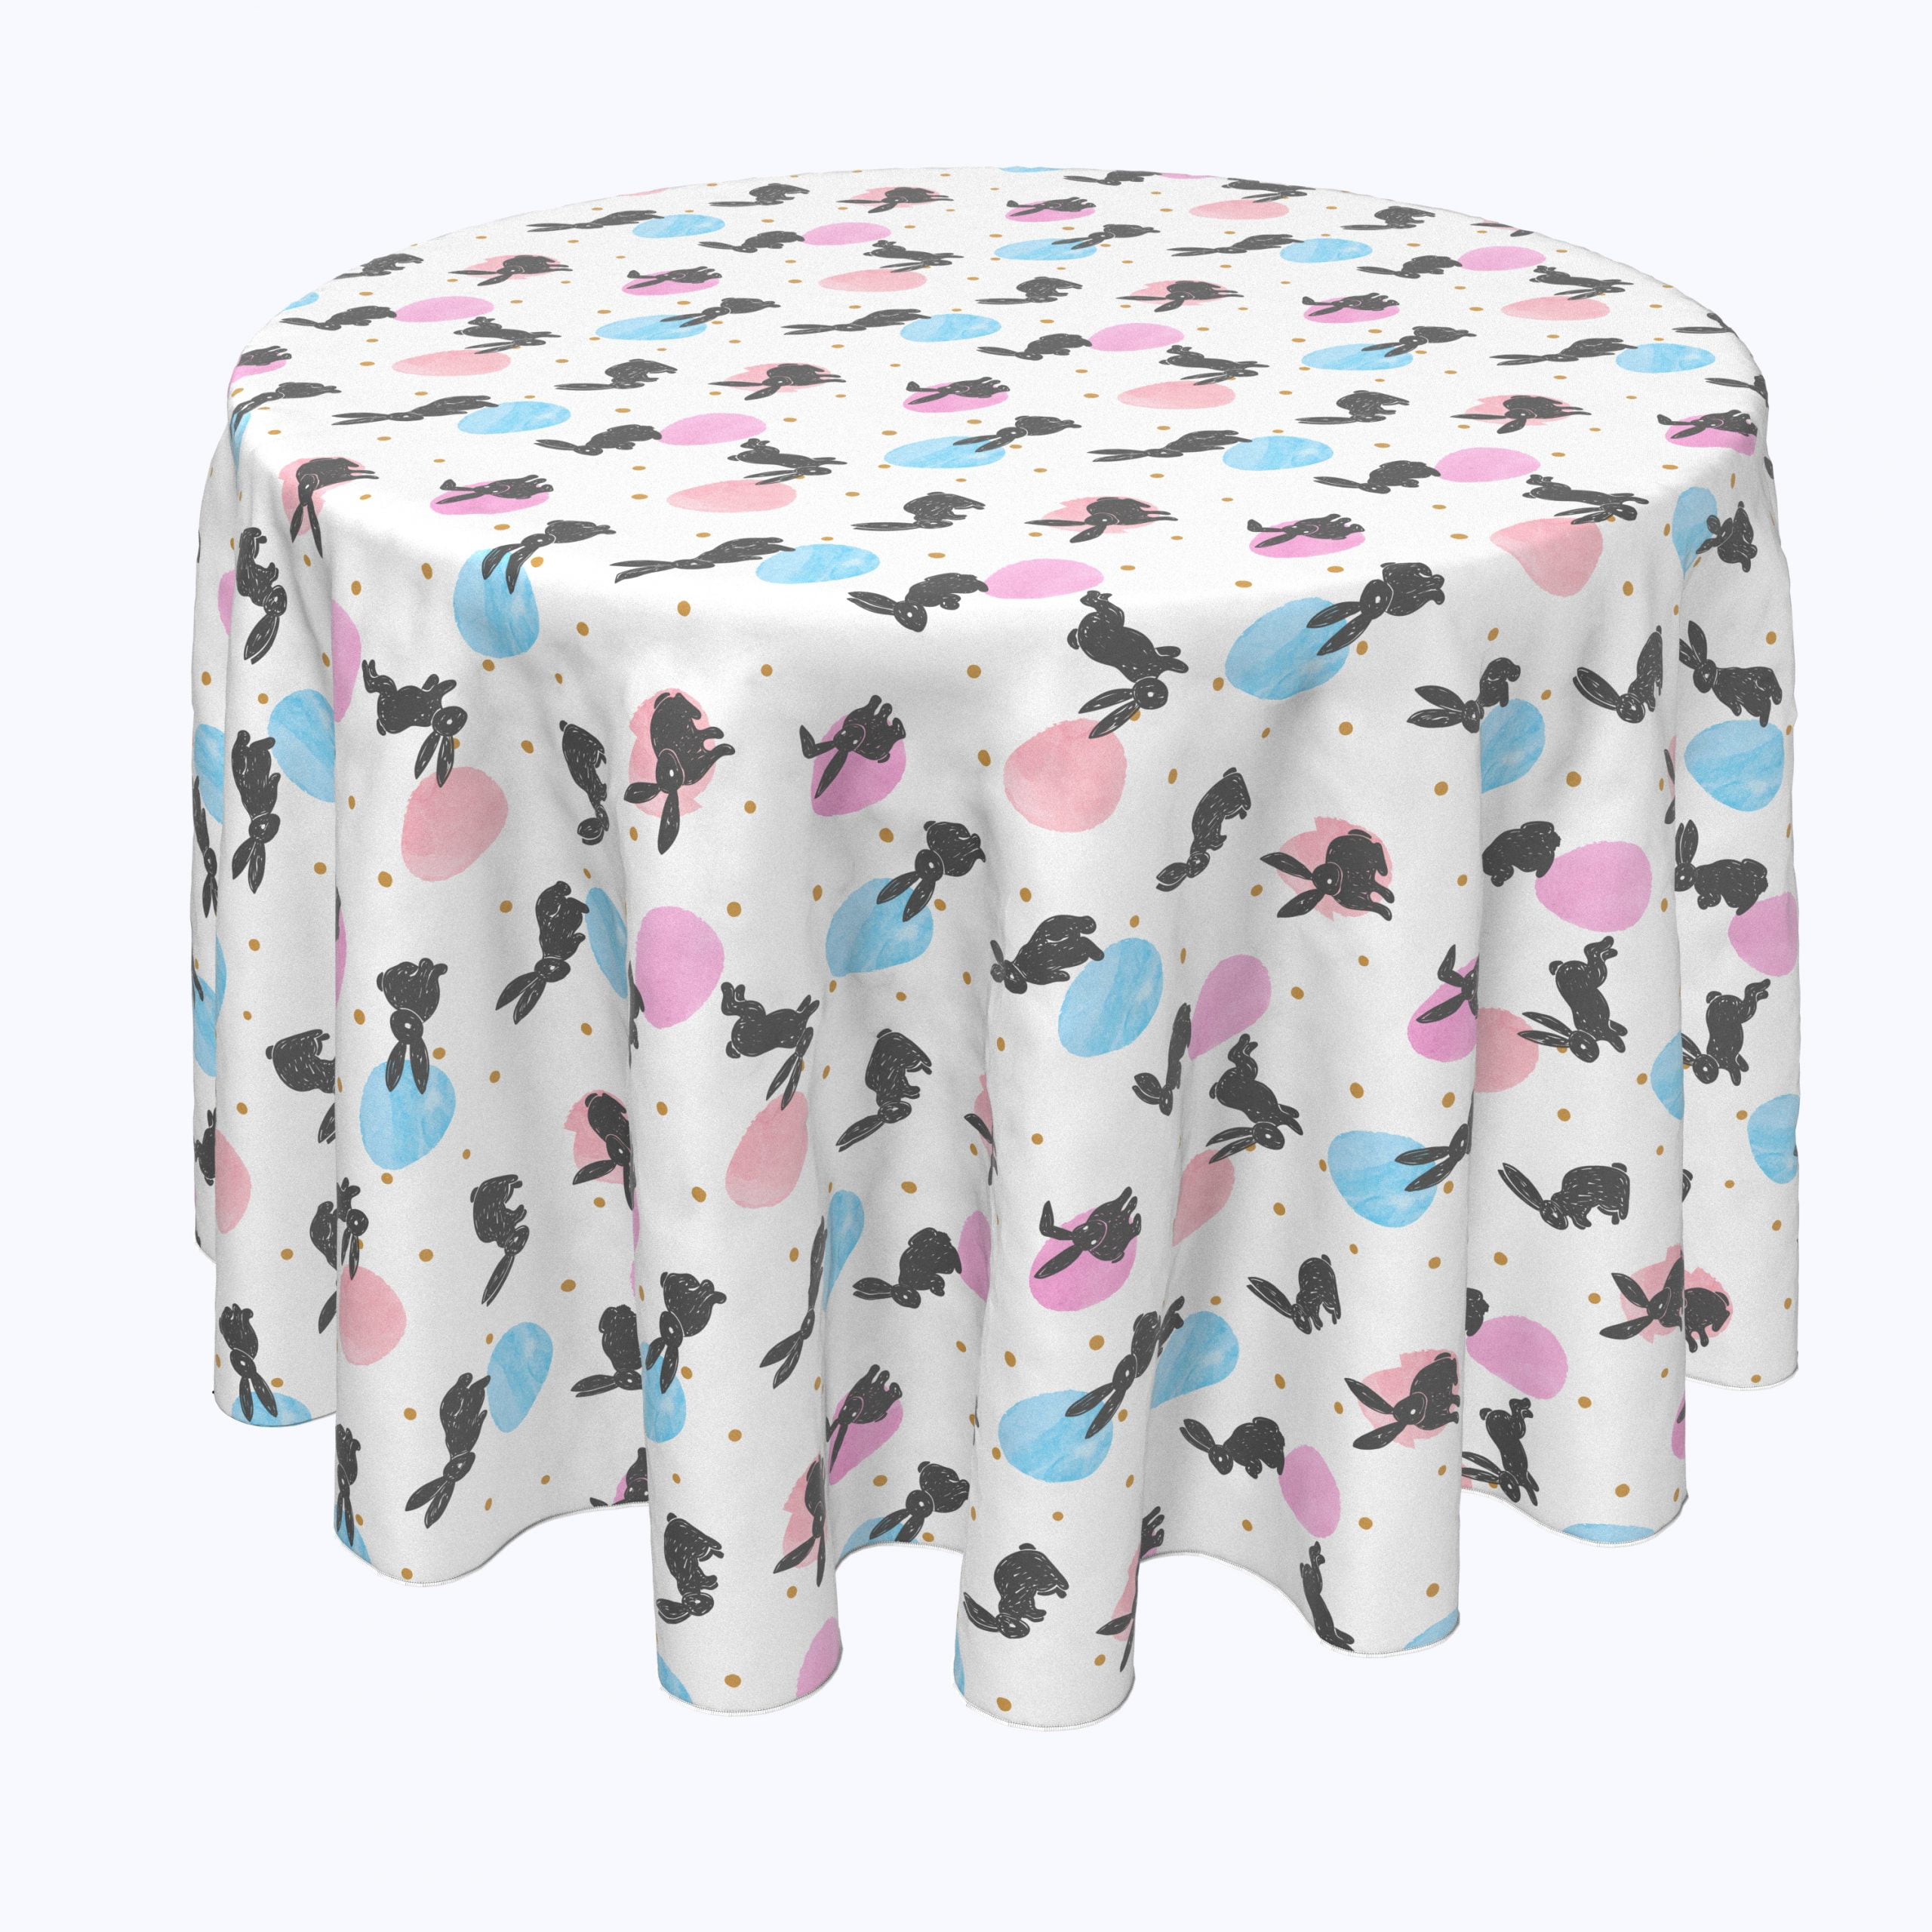 Round Tablecloth 100 Polyester 102, 102 Round Tablecloth